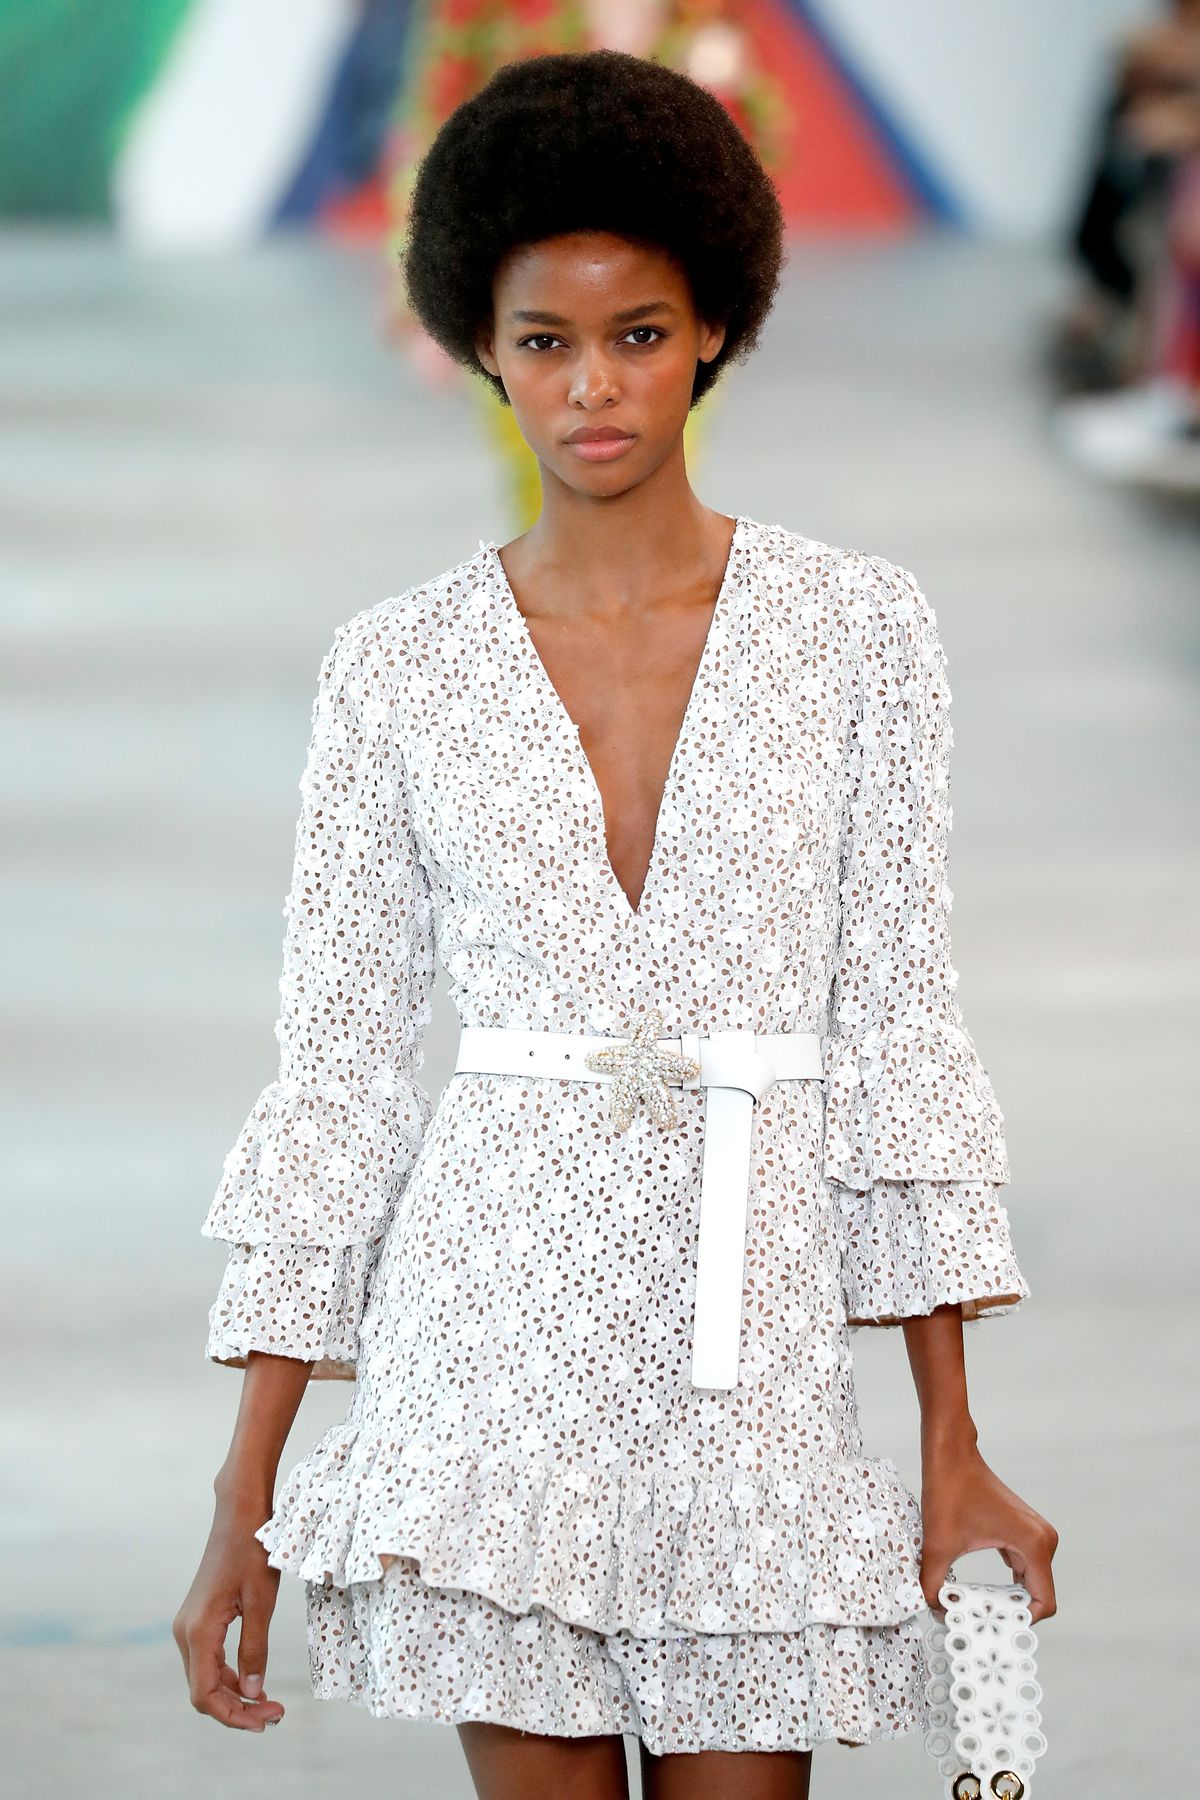 A model wears a frilly white minidress with long bell sleeves.